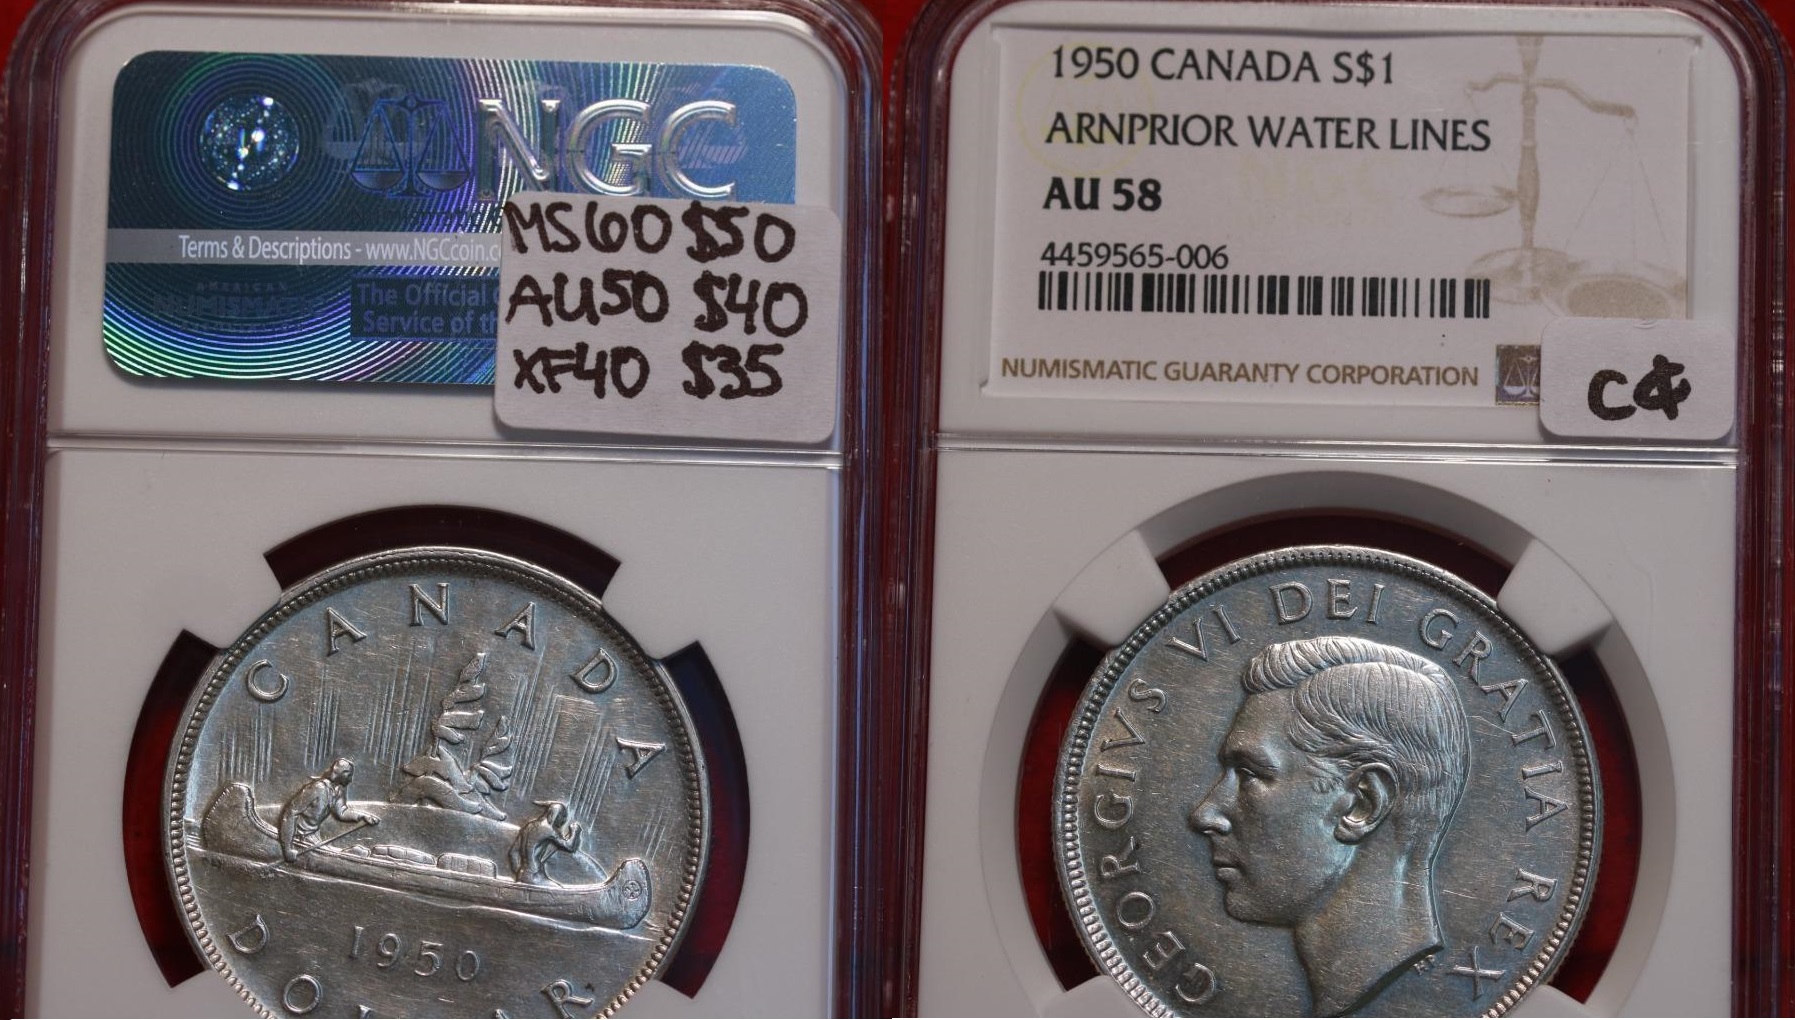 1950 Silver Canada $1 Coin Armprior Water Lines NGC Au-58  362386809710  vette1986 r.jpg